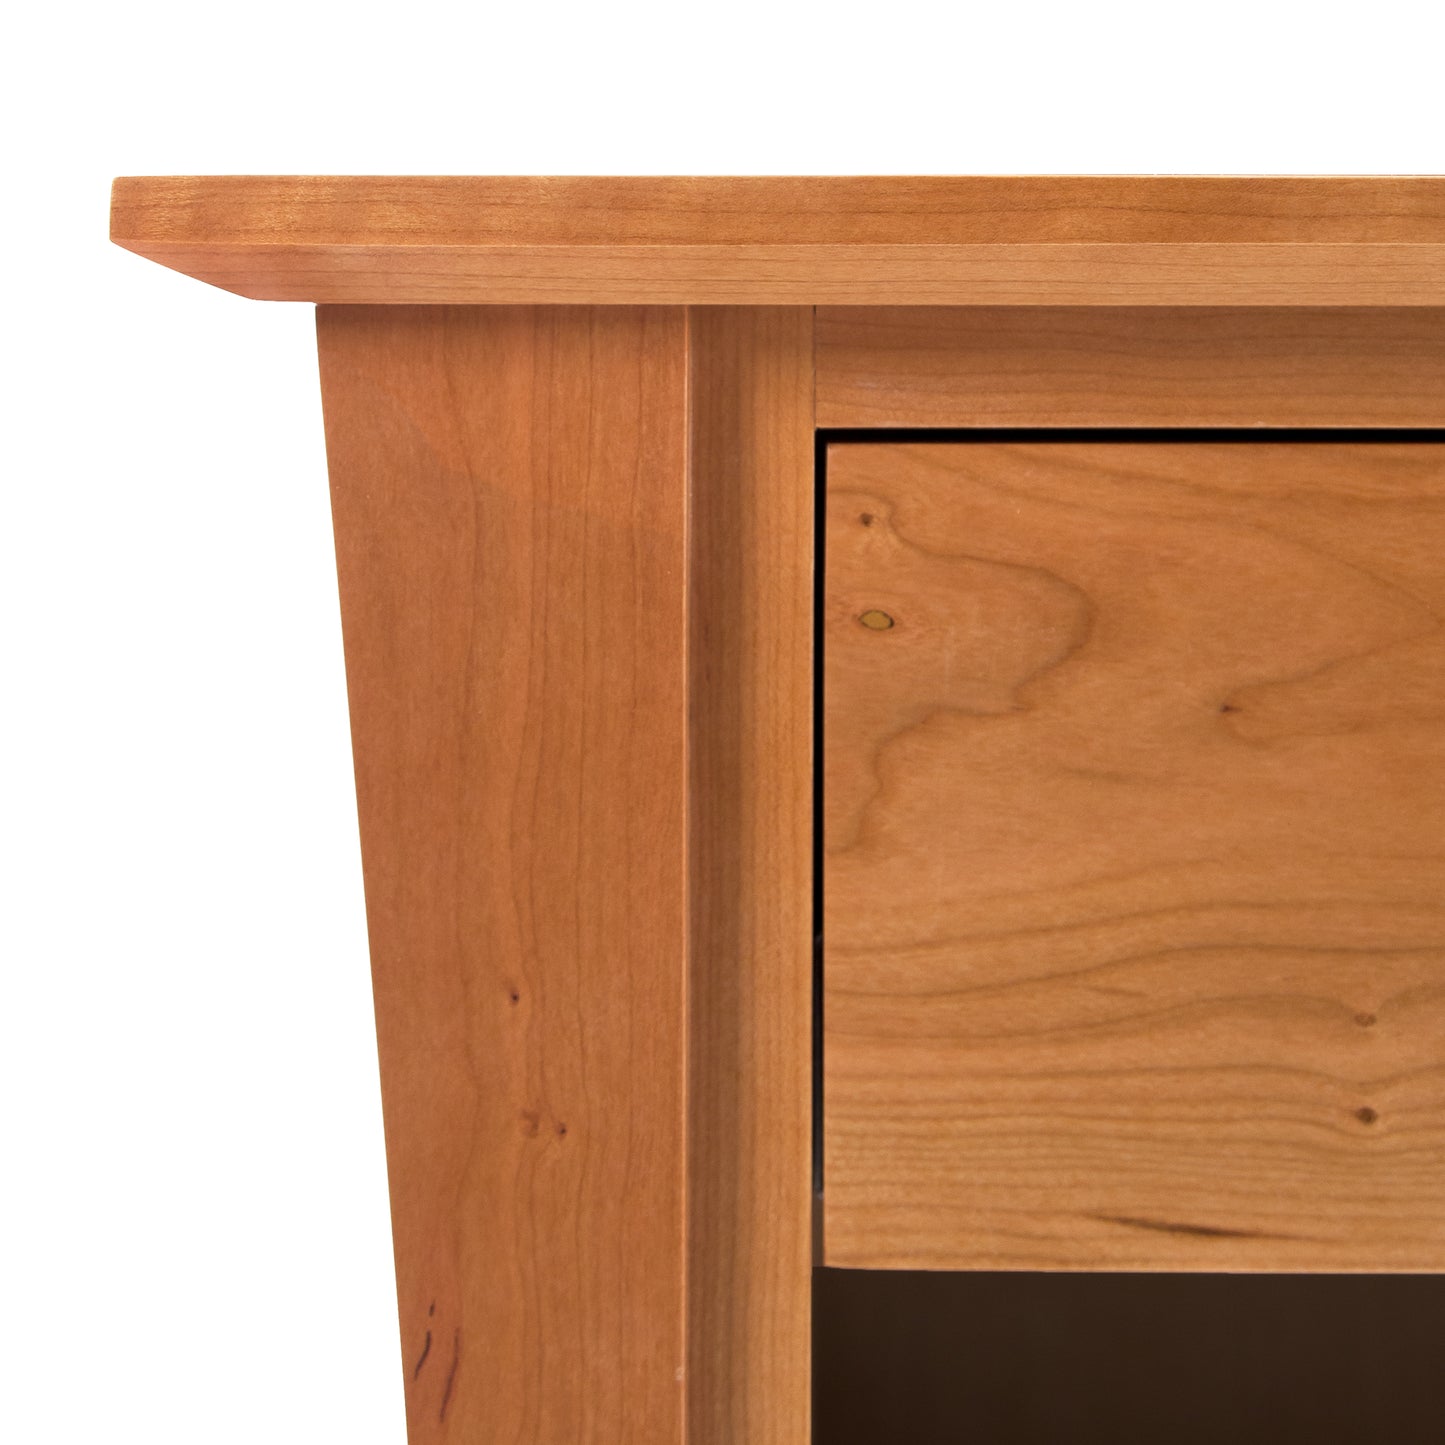 A close up of the Lyndon Furniture Andrews 1-Drawer Enclosed Shelf Nightstand with a drawer and storage space.